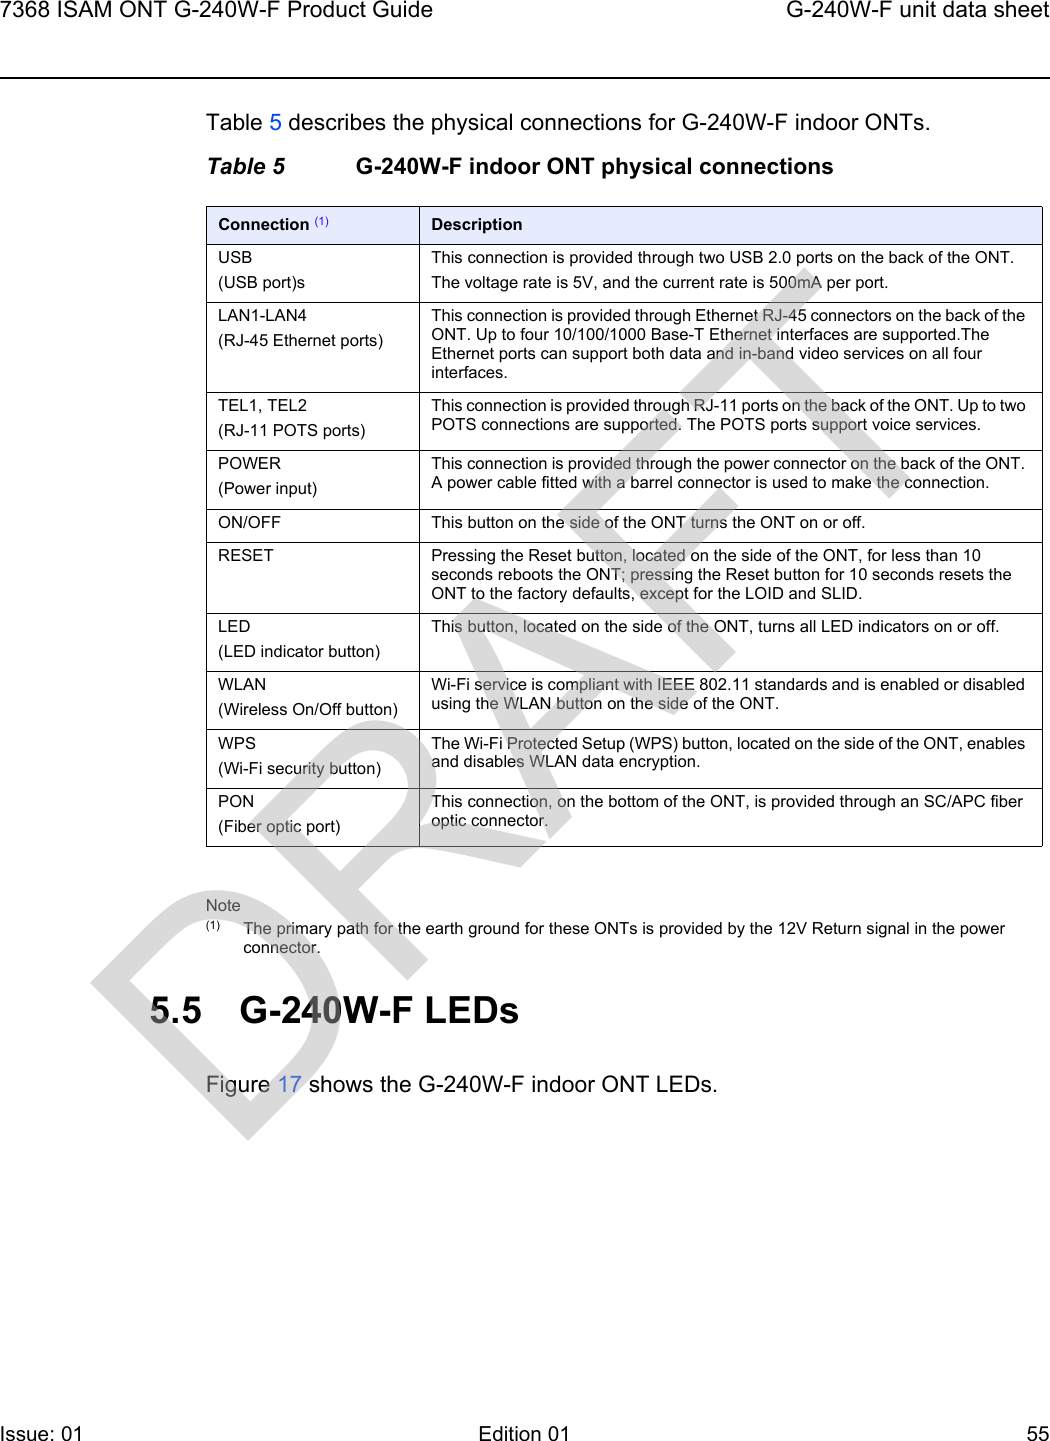 7368 ISAM ONT G-240W-F Product Guide G-240W-F unit data sheetIssue: 01 Edition 01 55 Table 5 describes the physical connections for G-240W-F indoor ONTs.Table 5 G-240W-F indoor ONT physical connectionsNote(1) The primary path for the earth ground for these ONTs is provided by the 12V Return signal in the power connector.5.5 G-240W-F LEDsFigure 17 shows the G-240W-F indoor ONT LEDs.Connection (1) DescriptionUSB(USB port)sThis connection is provided through two USB 2.0 ports on the back of the ONT. The voltage rate is 5V, and the current rate is 500mA per port. LAN1-LAN4(RJ-45 Ethernet ports)This connection is provided through Ethernet RJ-45 connectors on the back of the ONT. Up to four 10/100/1000 Base-T Ethernet interfaces are supported.The Ethernet ports can support both data and in-band video services on all four interfaces.TEL1, TEL2(RJ-11 POTS ports)This connection is provided through RJ-11 ports on the back of the ONT. Up to two POTS connections are supported. The POTS ports support voice services. POWER(Power input)This connection is provided through the power connector on the back of the ONT. A power cable fitted with a barrel connector is used to make the connection. ON/OFF This button on the side of the ONT turns the ONT on or off. RESET Pressing the Reset button, located on the side of the ONT, for less than 10 seconds reboots the ONT; pressing the Reset button for 10 seconds resets the ONT to the factory defaults, except for the LOID and SLID.LED (LED indicator button)This button, located on the side of the ONT, turns all LED indicators on or off.WLAN (Wireless On/Off button)Wi-Fi service is compliant with IEEE 802.11 standards and is enabled or disabled using the WLAN button on the side of the ONT. WPS (Wi-Fi security button)The Wi-Fi Protected Setup (WPS) button, located on the side of the ONT, enables and disables WLAN data encryption.PON (Fiber optic port)This connection, on the bottom of the ONT, is provided through an SC/APC fiber optic connector. DRAFT